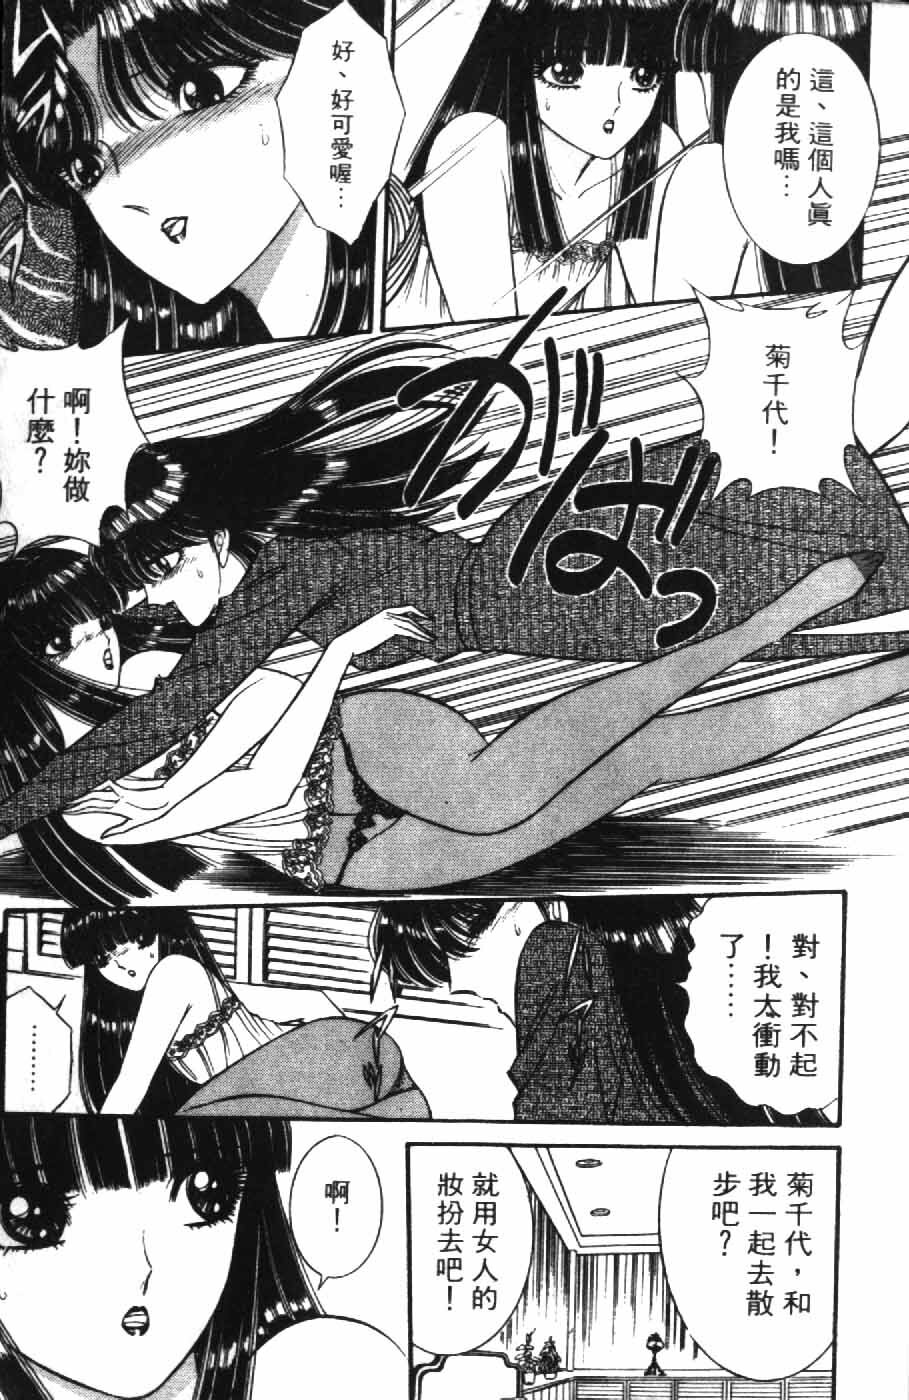 [Senno Knife] Ouma ga Horror Show 1 - Trans Sexual Special Show 1 | 顫慄博覽會 1 [Chinese] page 5 full